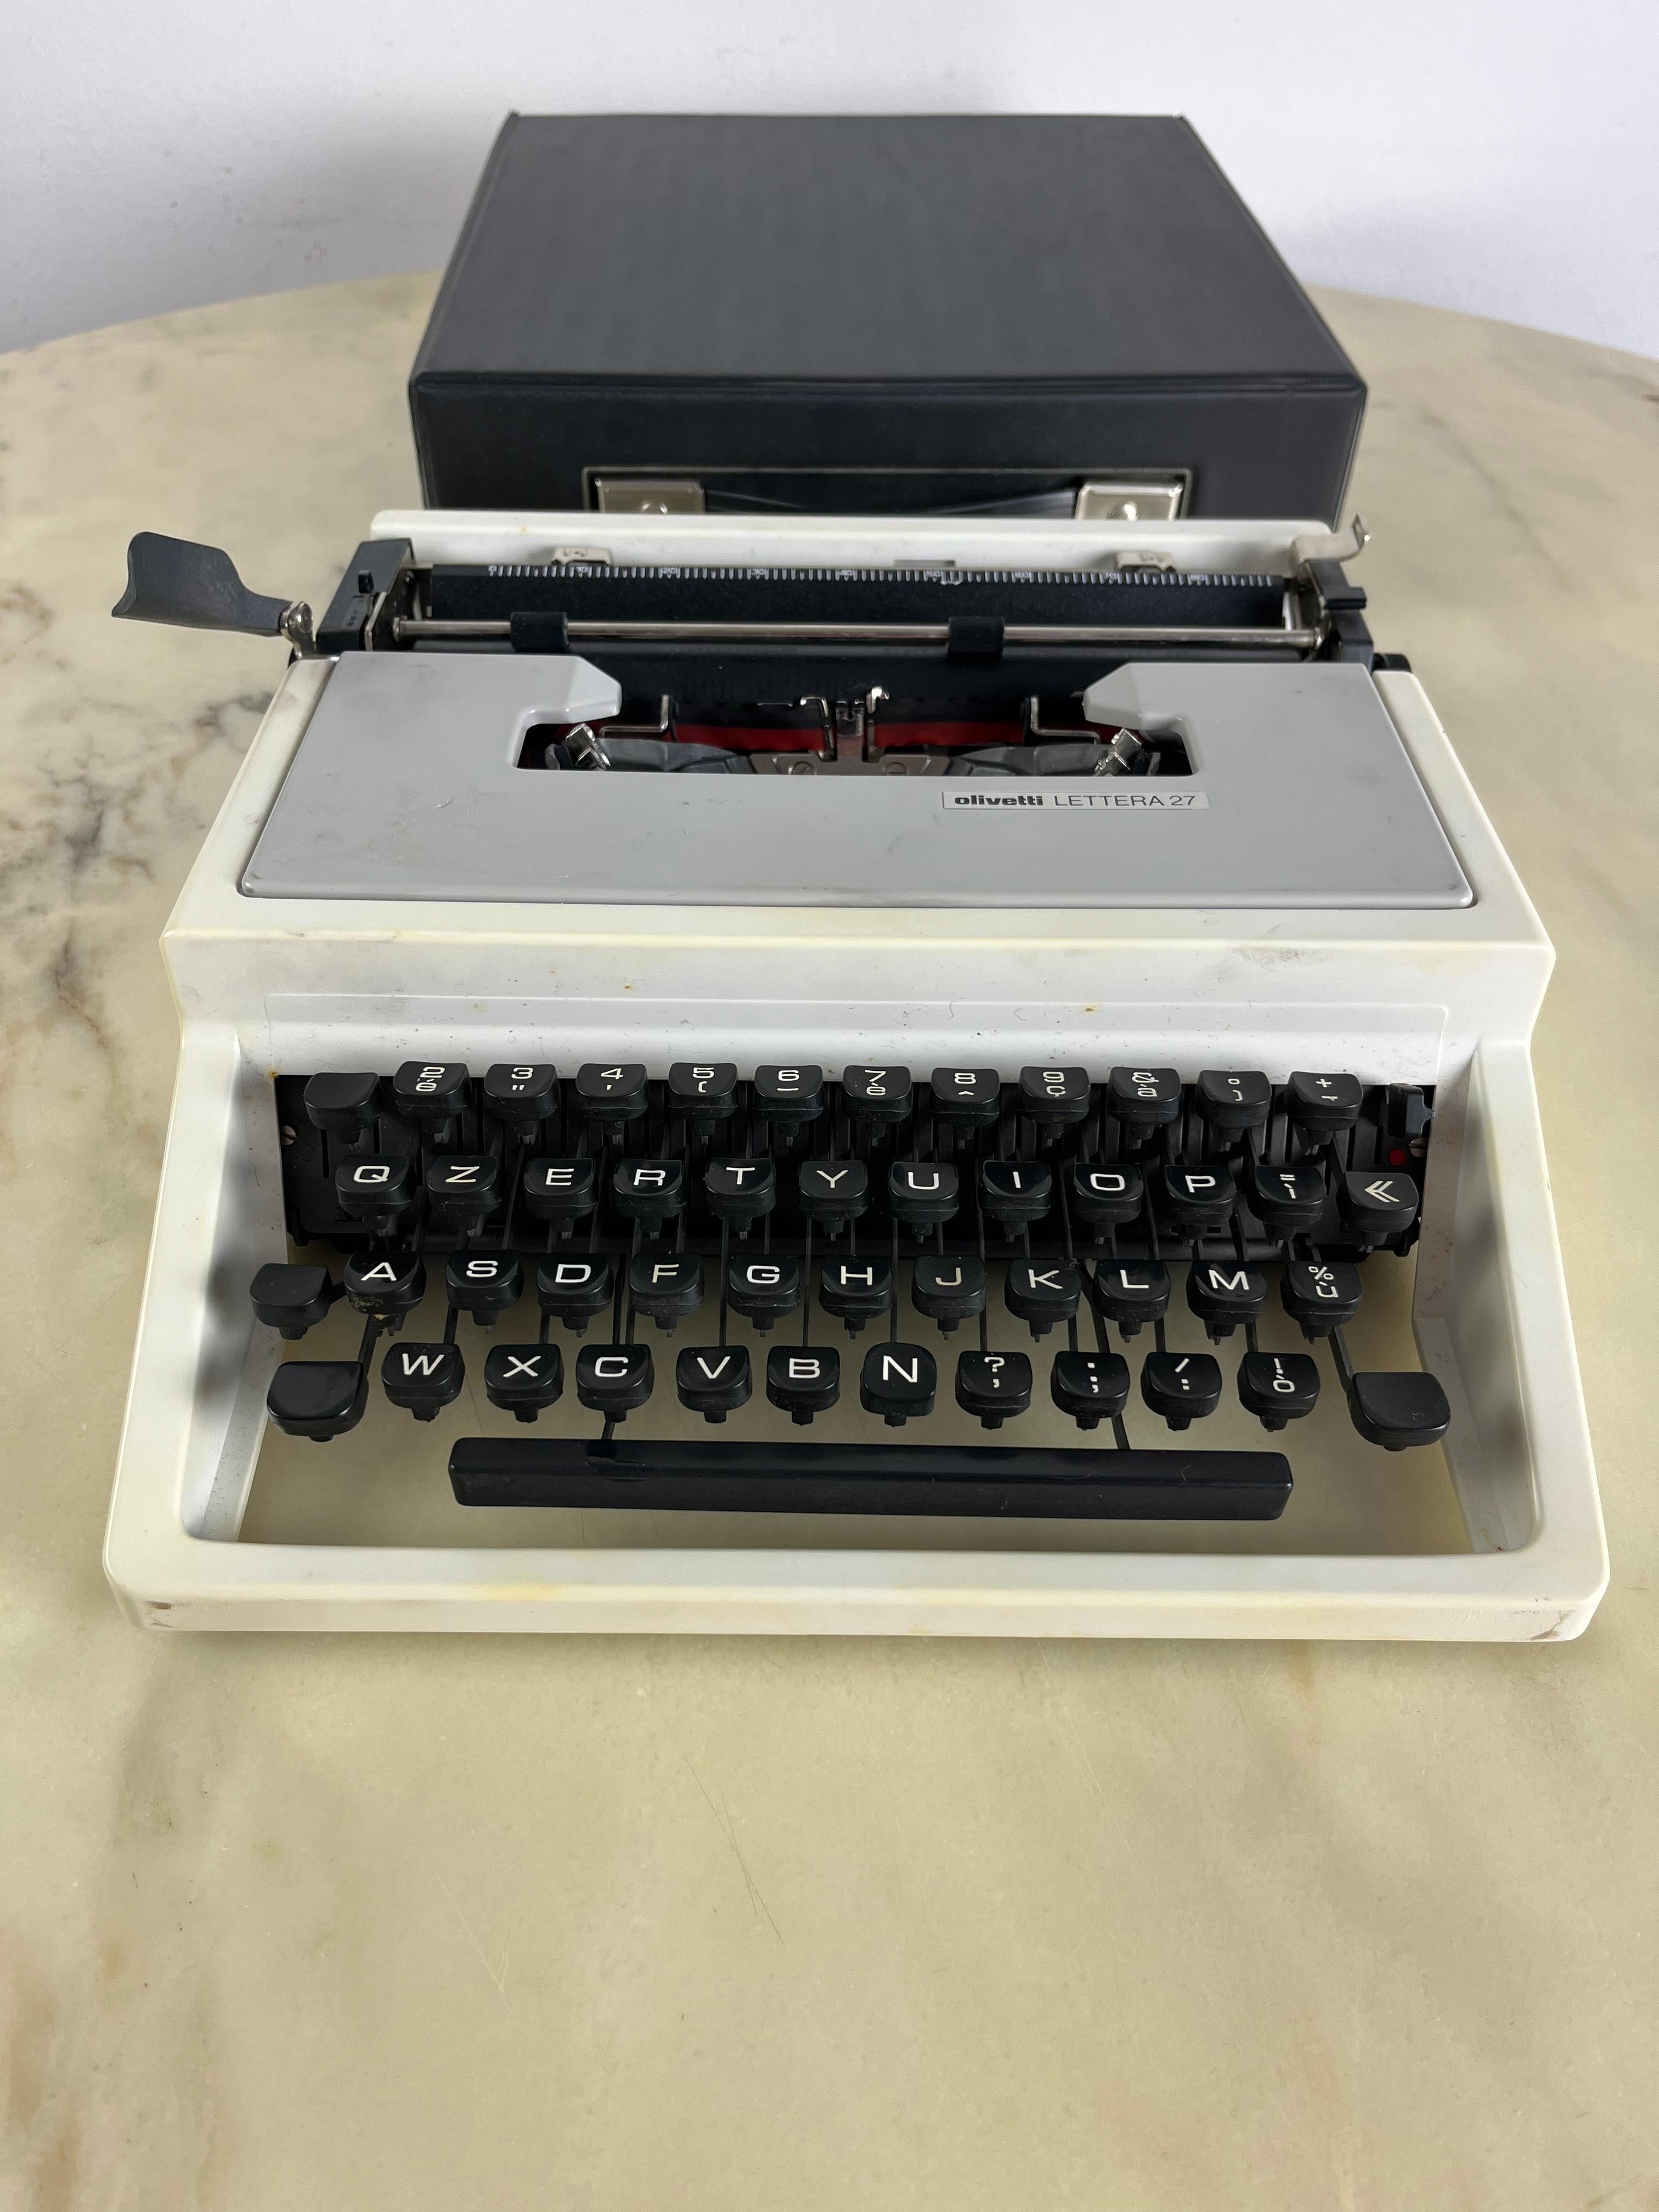 Olivetti portable typewriter model Lettera 27.
Intact and functional, equipped with transport cover.
Good condition.